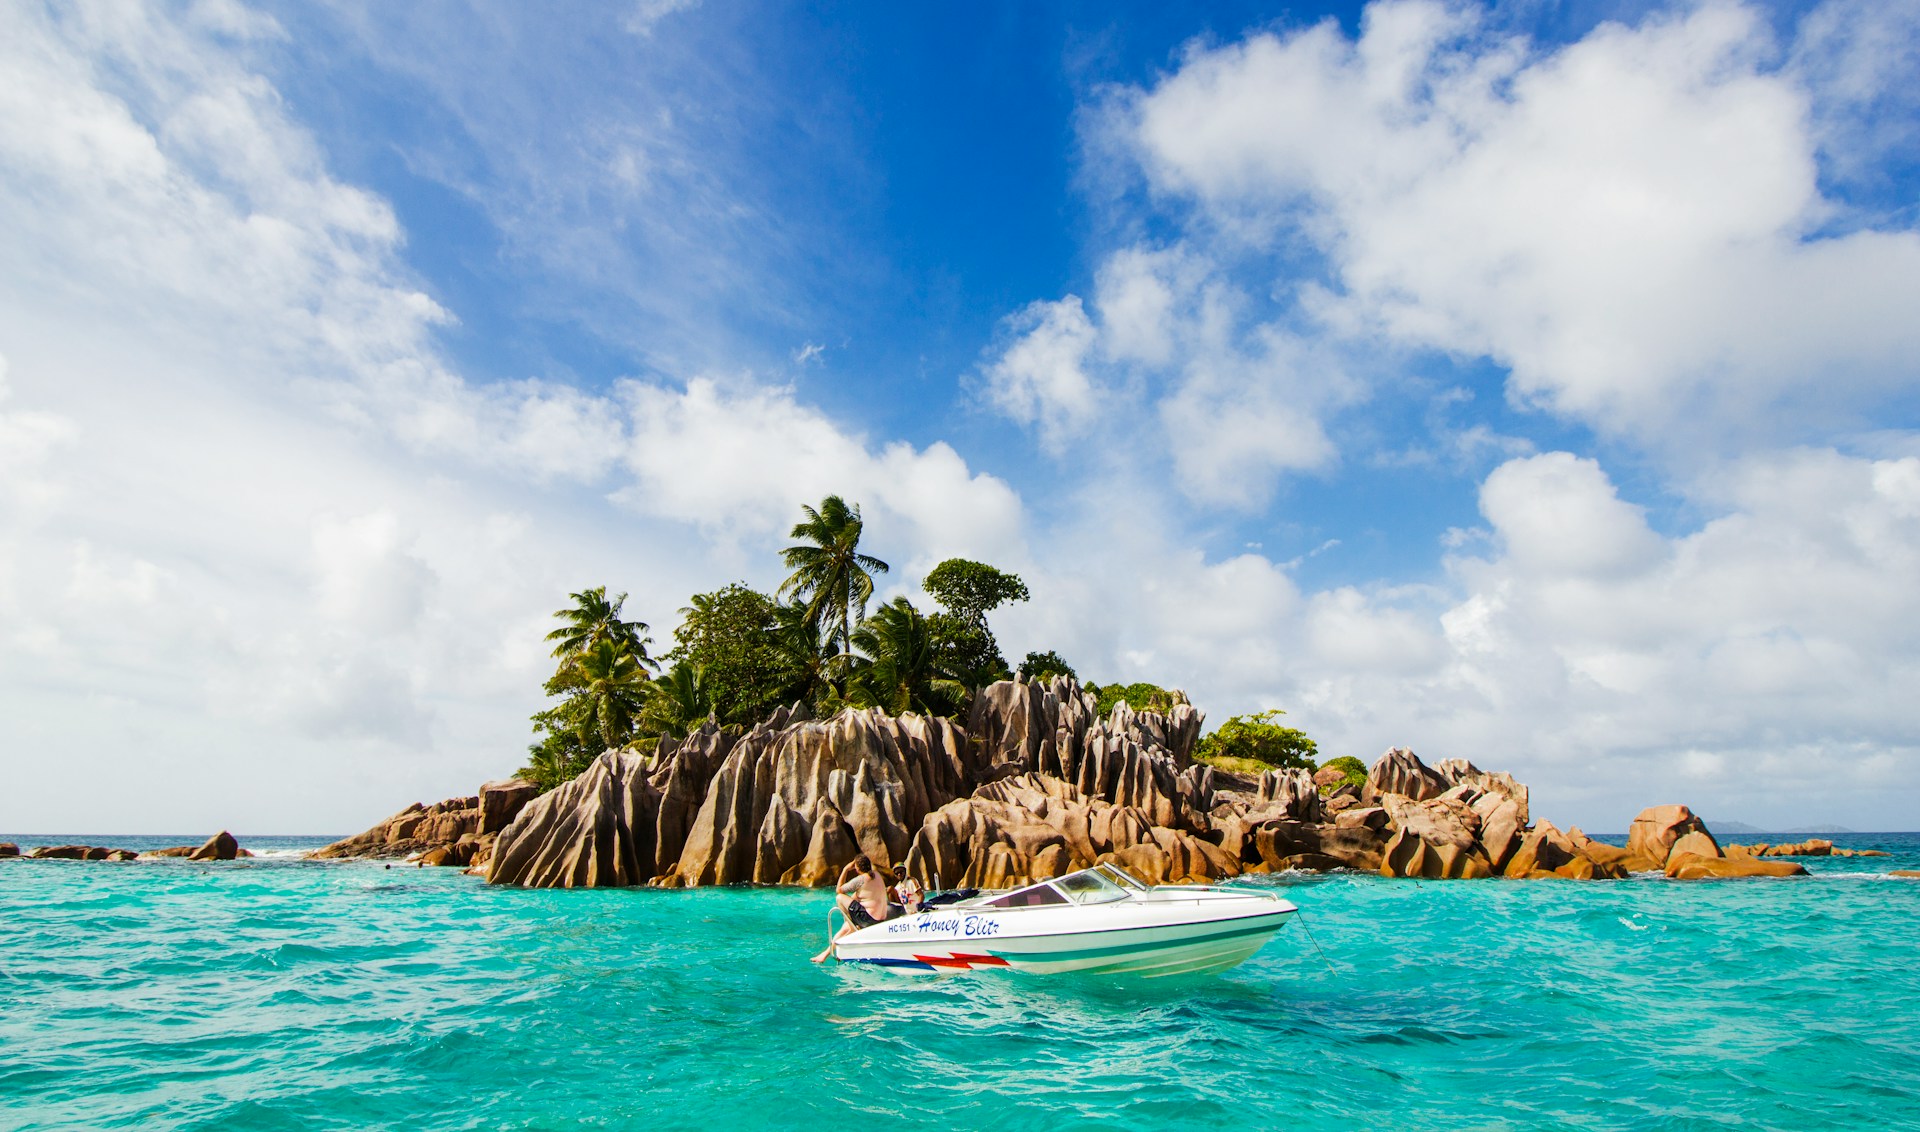 Men on boat surrounded by rock formations and coconut trees in turquoise sea